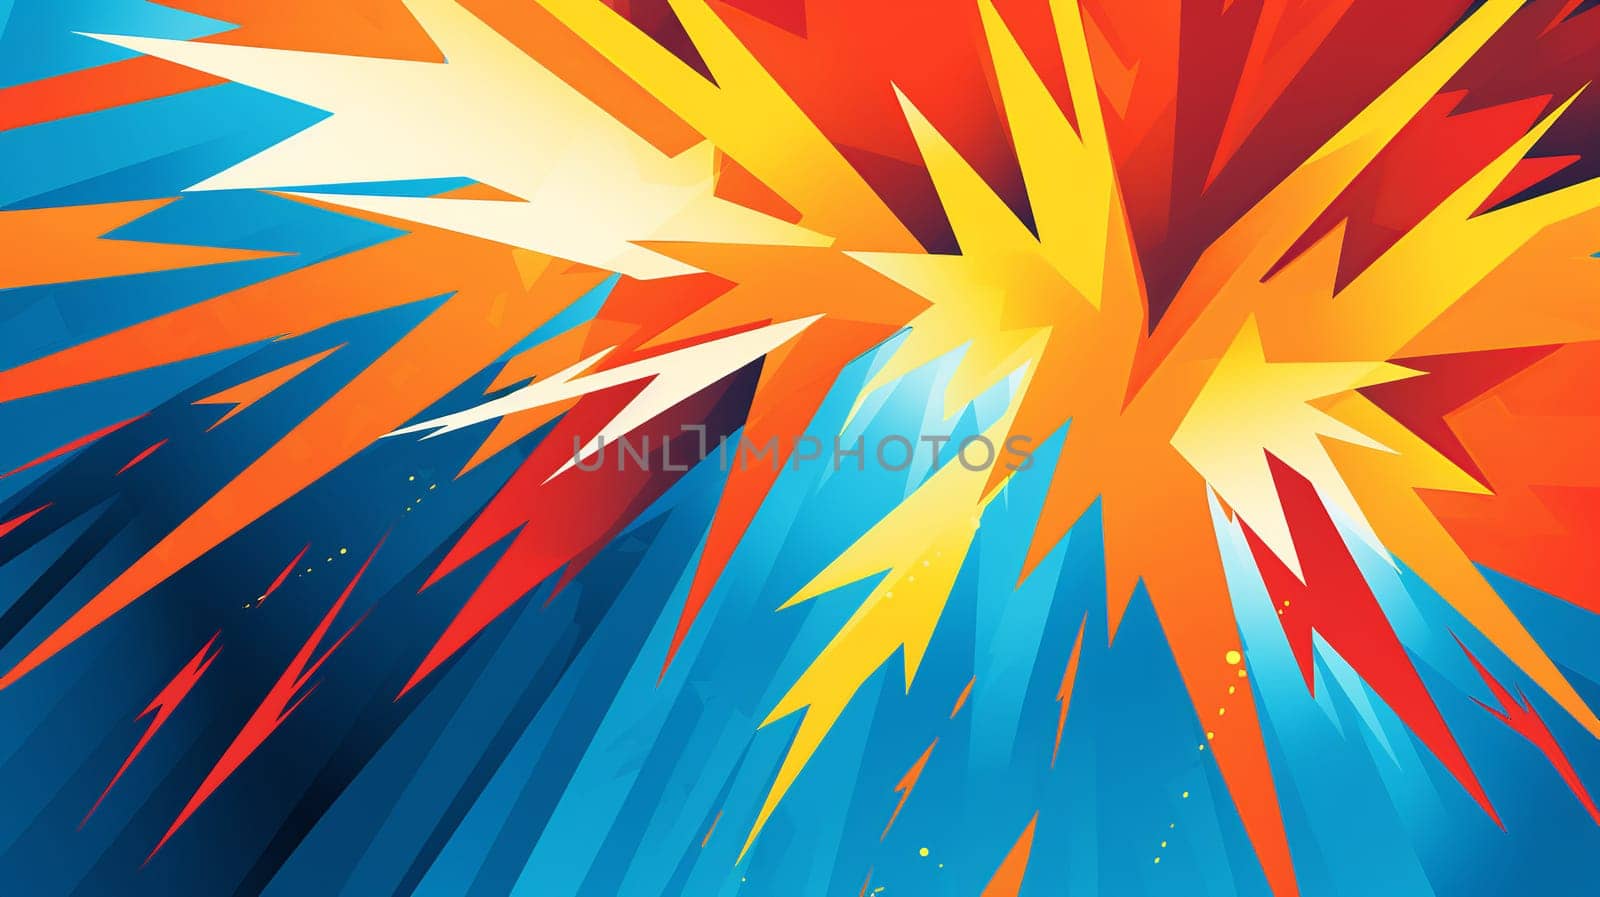 Wallpaper background, Abstract zap explosion dash line lightning bolt background , Generate AI